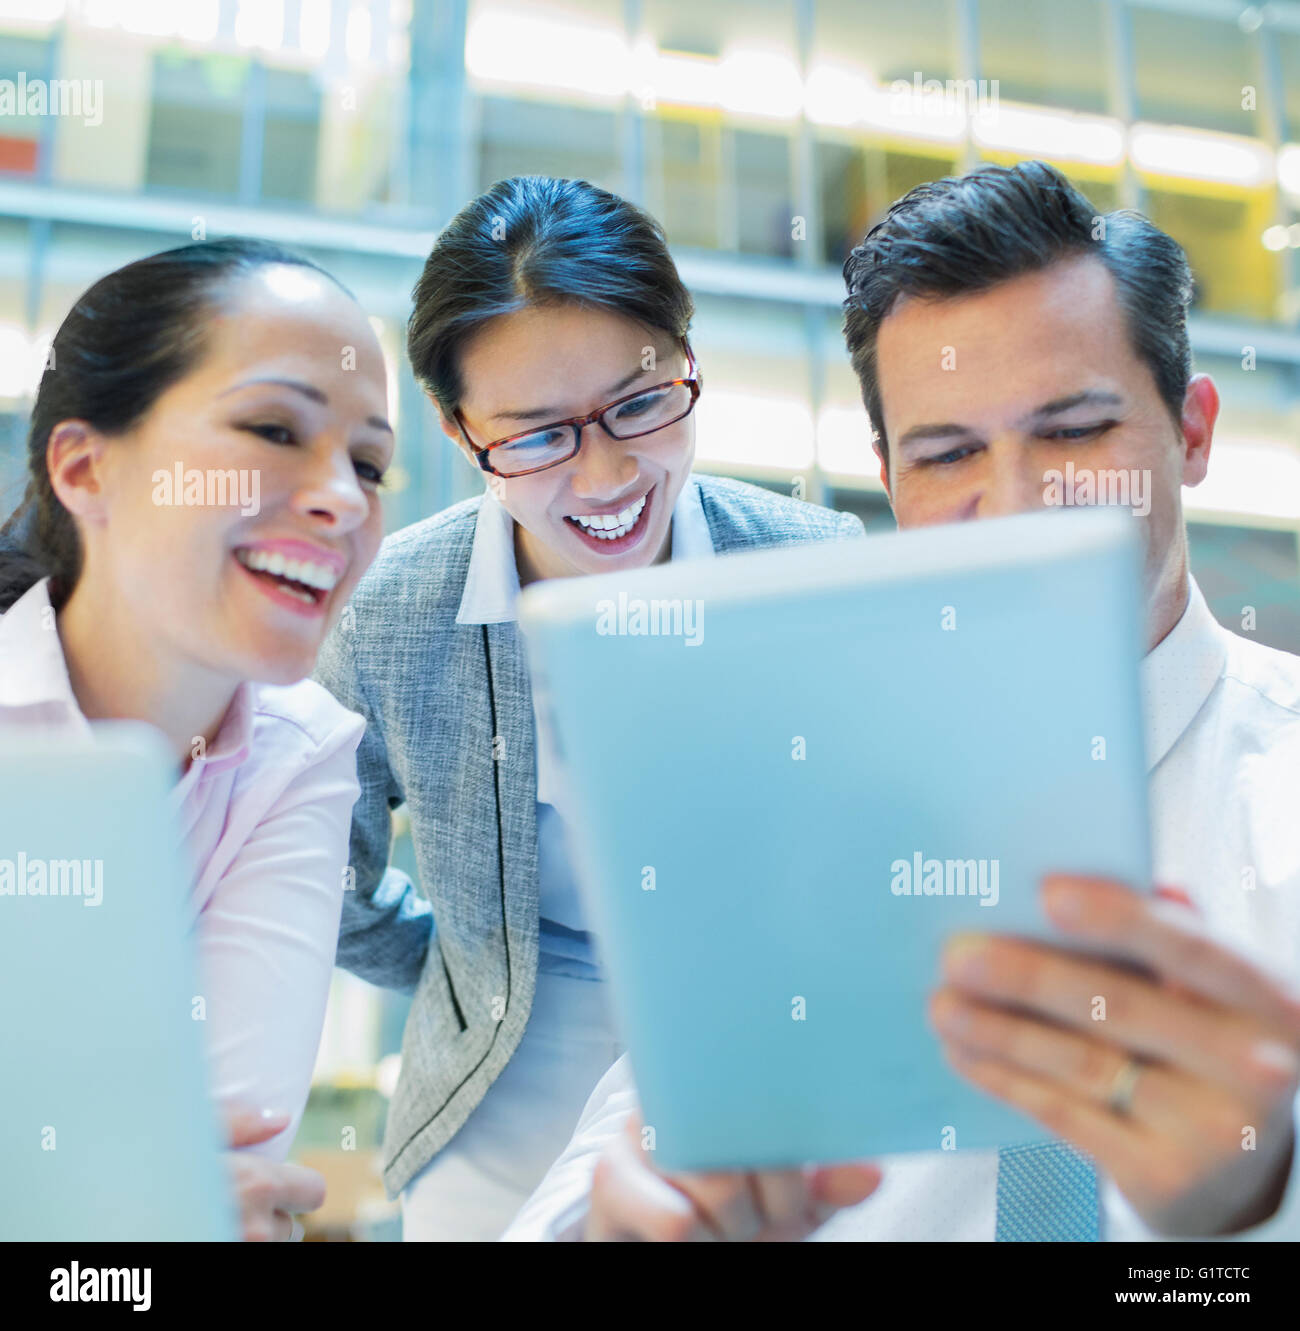 Smiling business people using digital tablet in office Banque D'Images